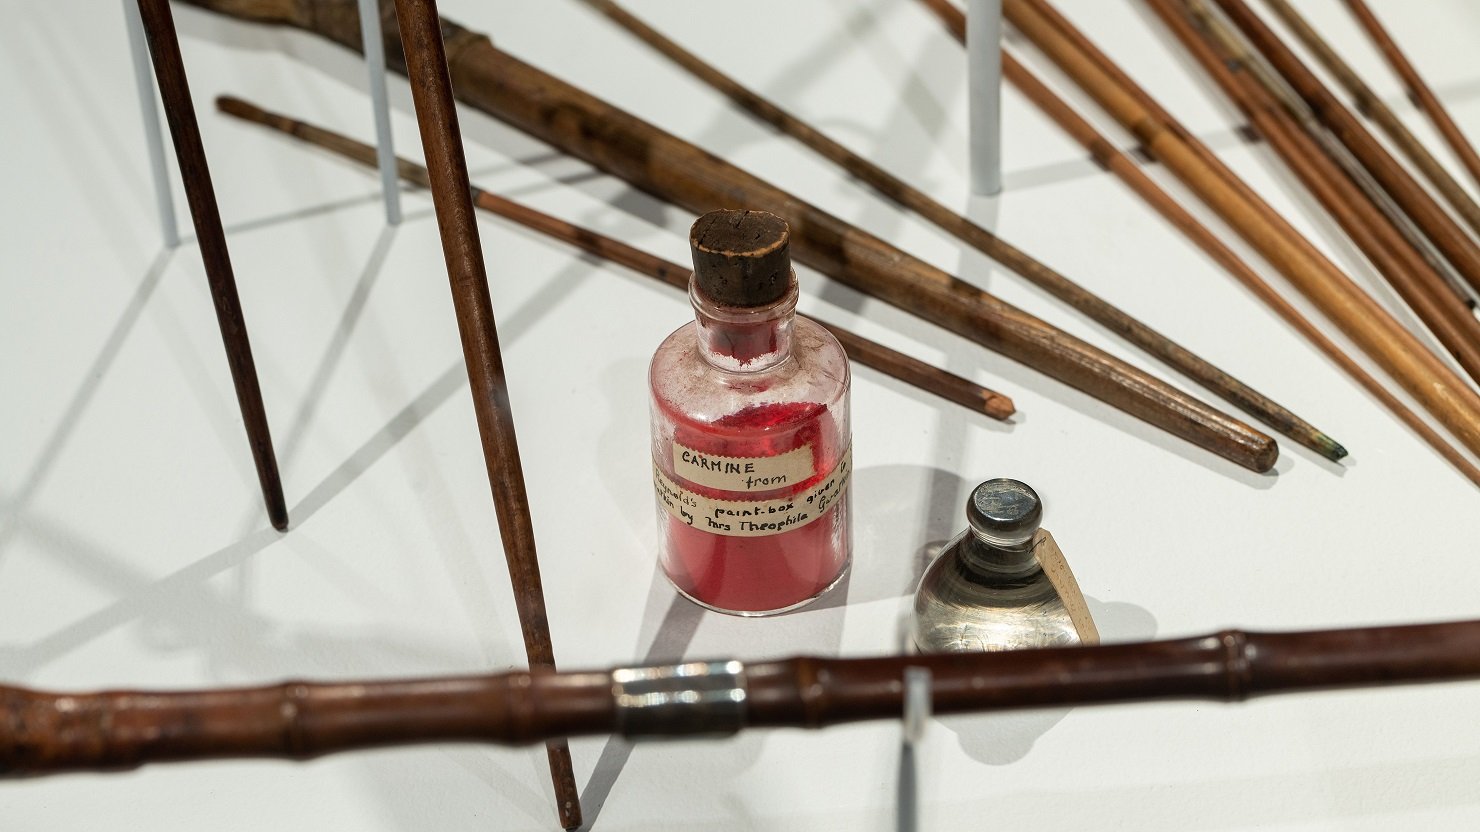 A bottle of red carmine pigment and artist brushes in a case